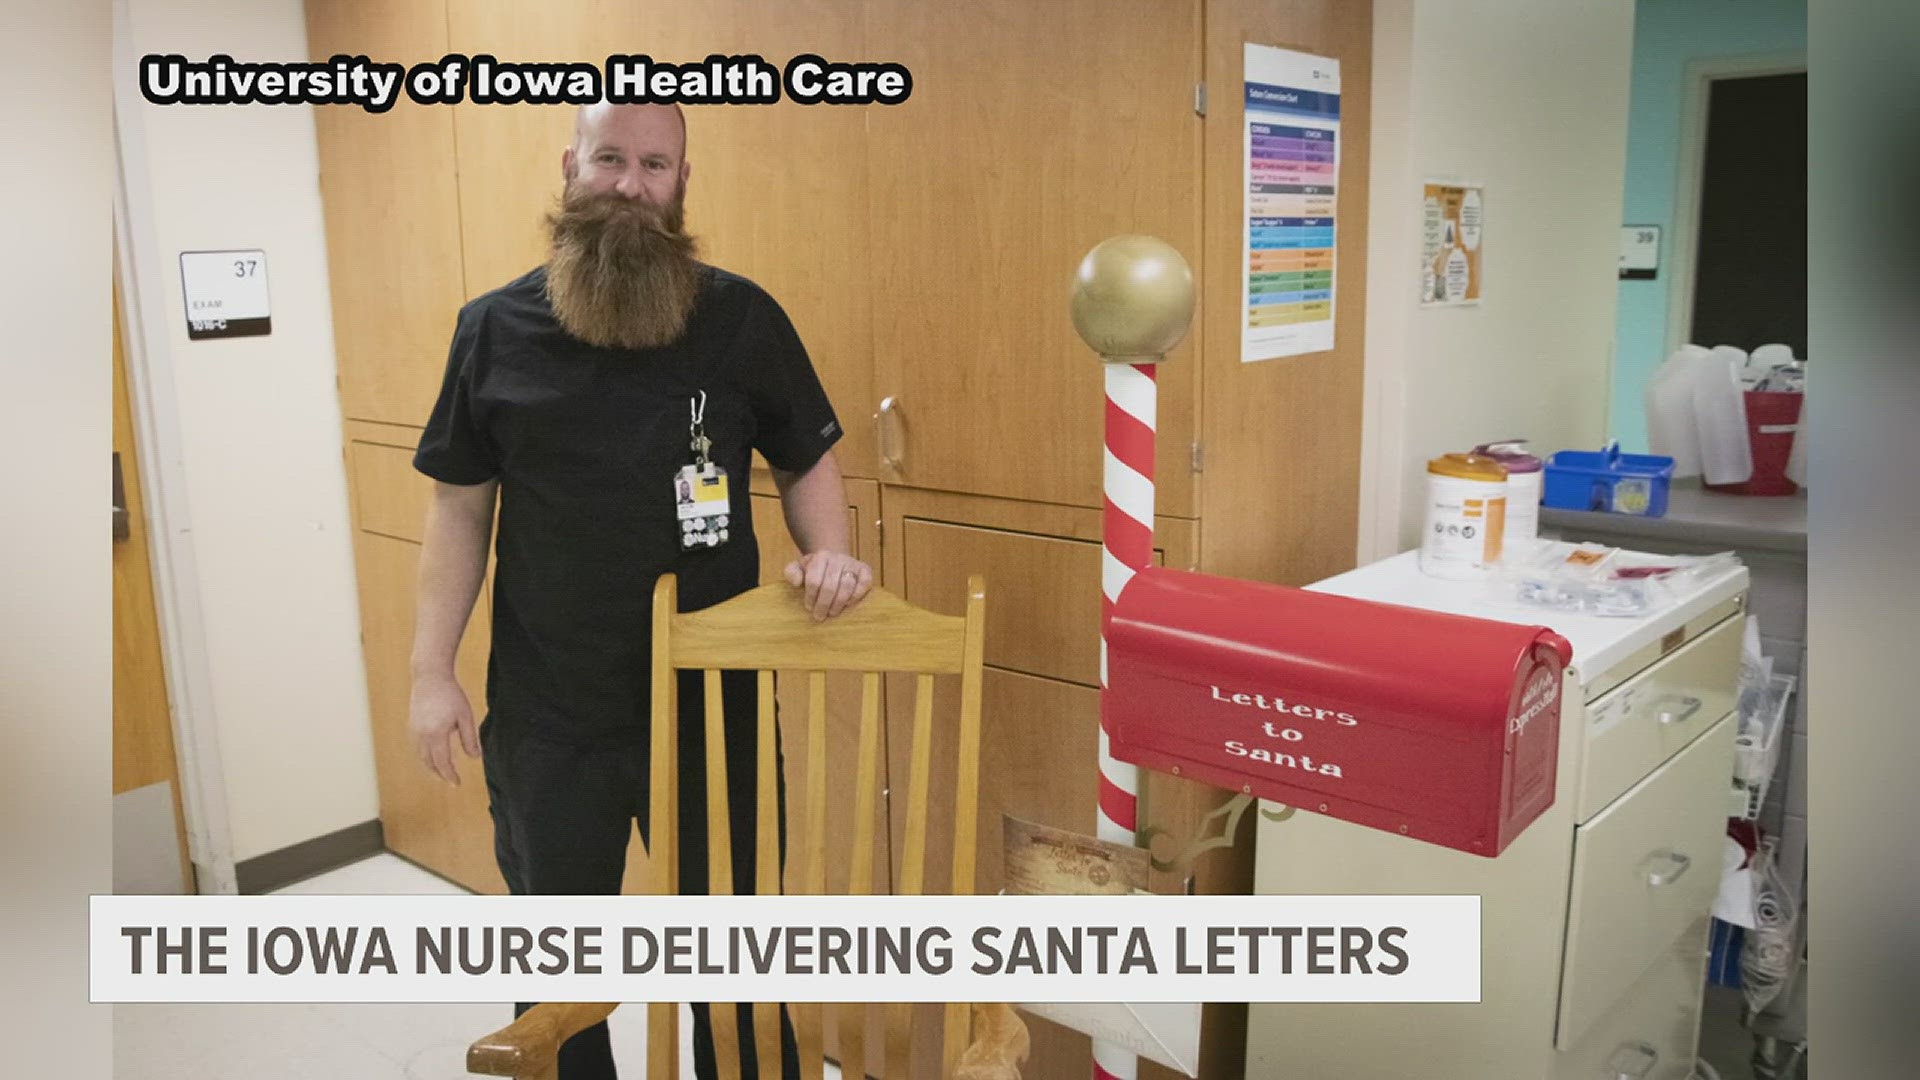 Nine-year-old spreads holiday cheer at hospitals with 'love boxes